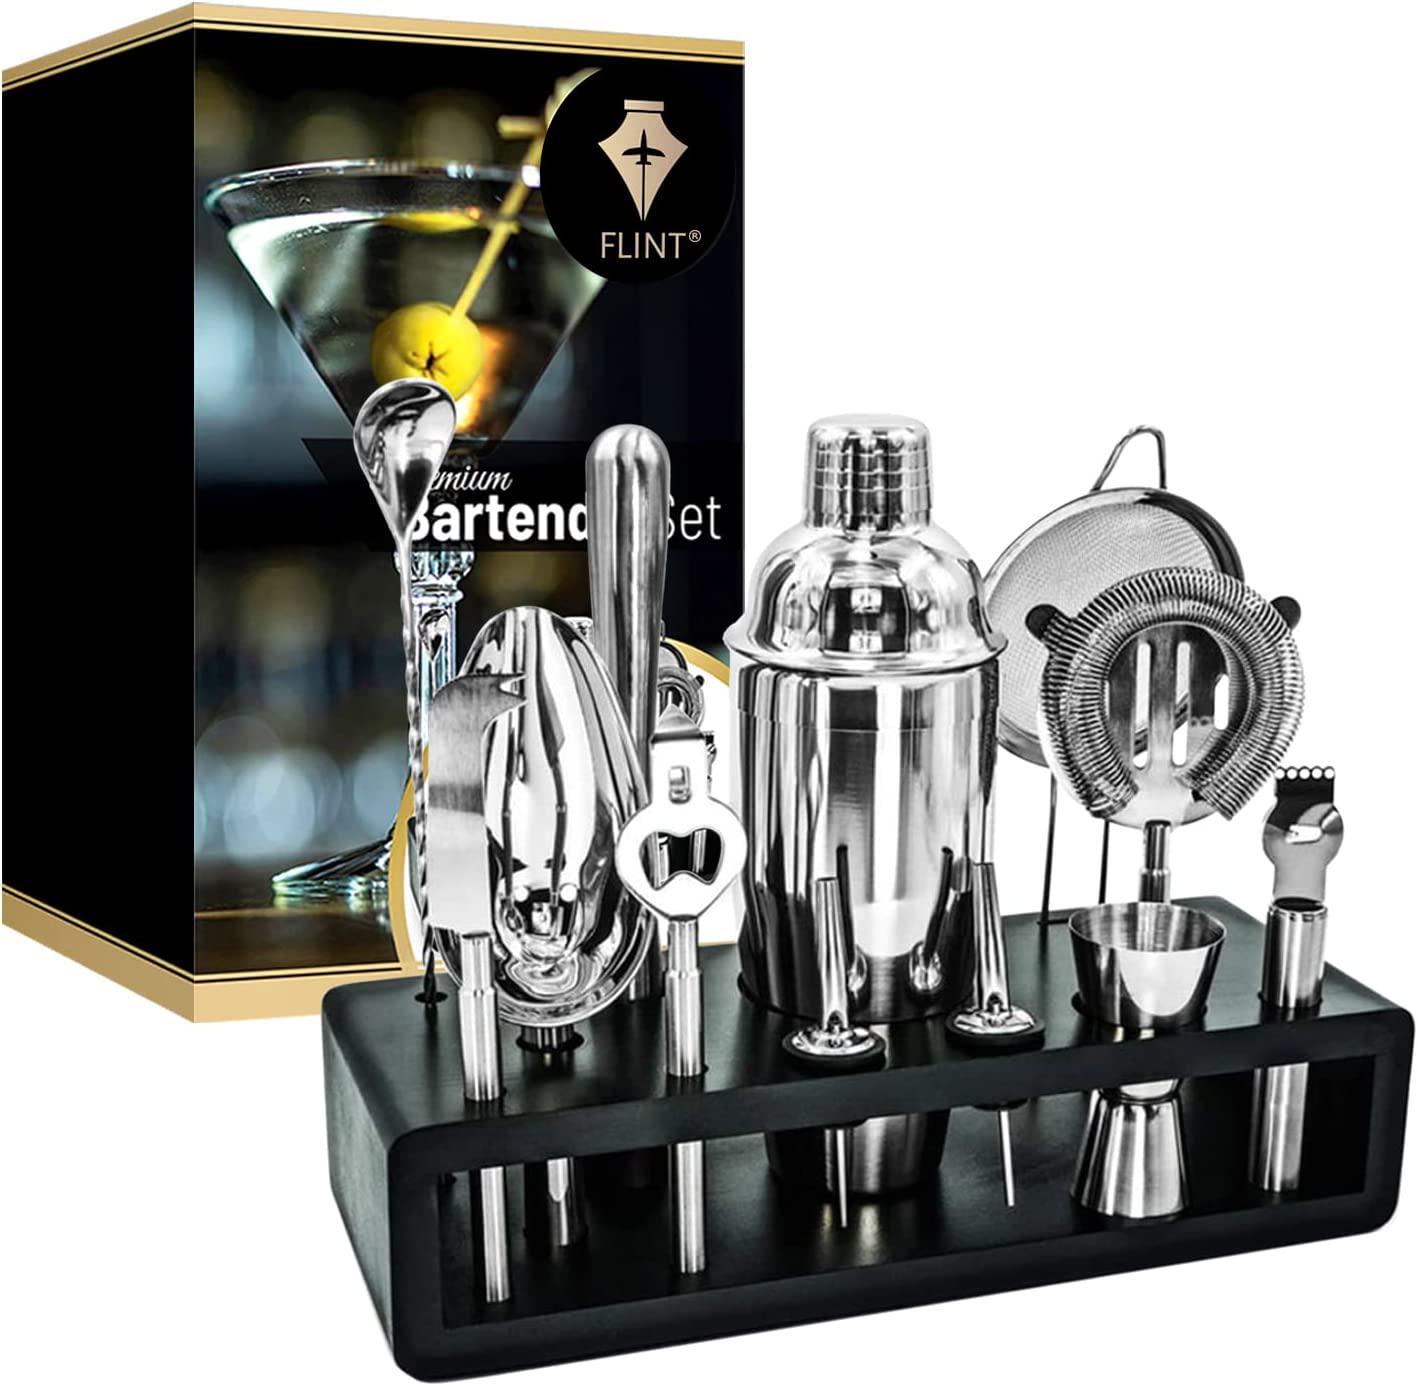 Flint, FLINT Premium Bartender Set | 13 Piece Cocktail Shaker Set | Bamboo Stand | Made of Stainless Steel | Rust Resistant Professional Bar Accessory Tools for Drink Mixing | Perfect Home Bartending Kit, Black